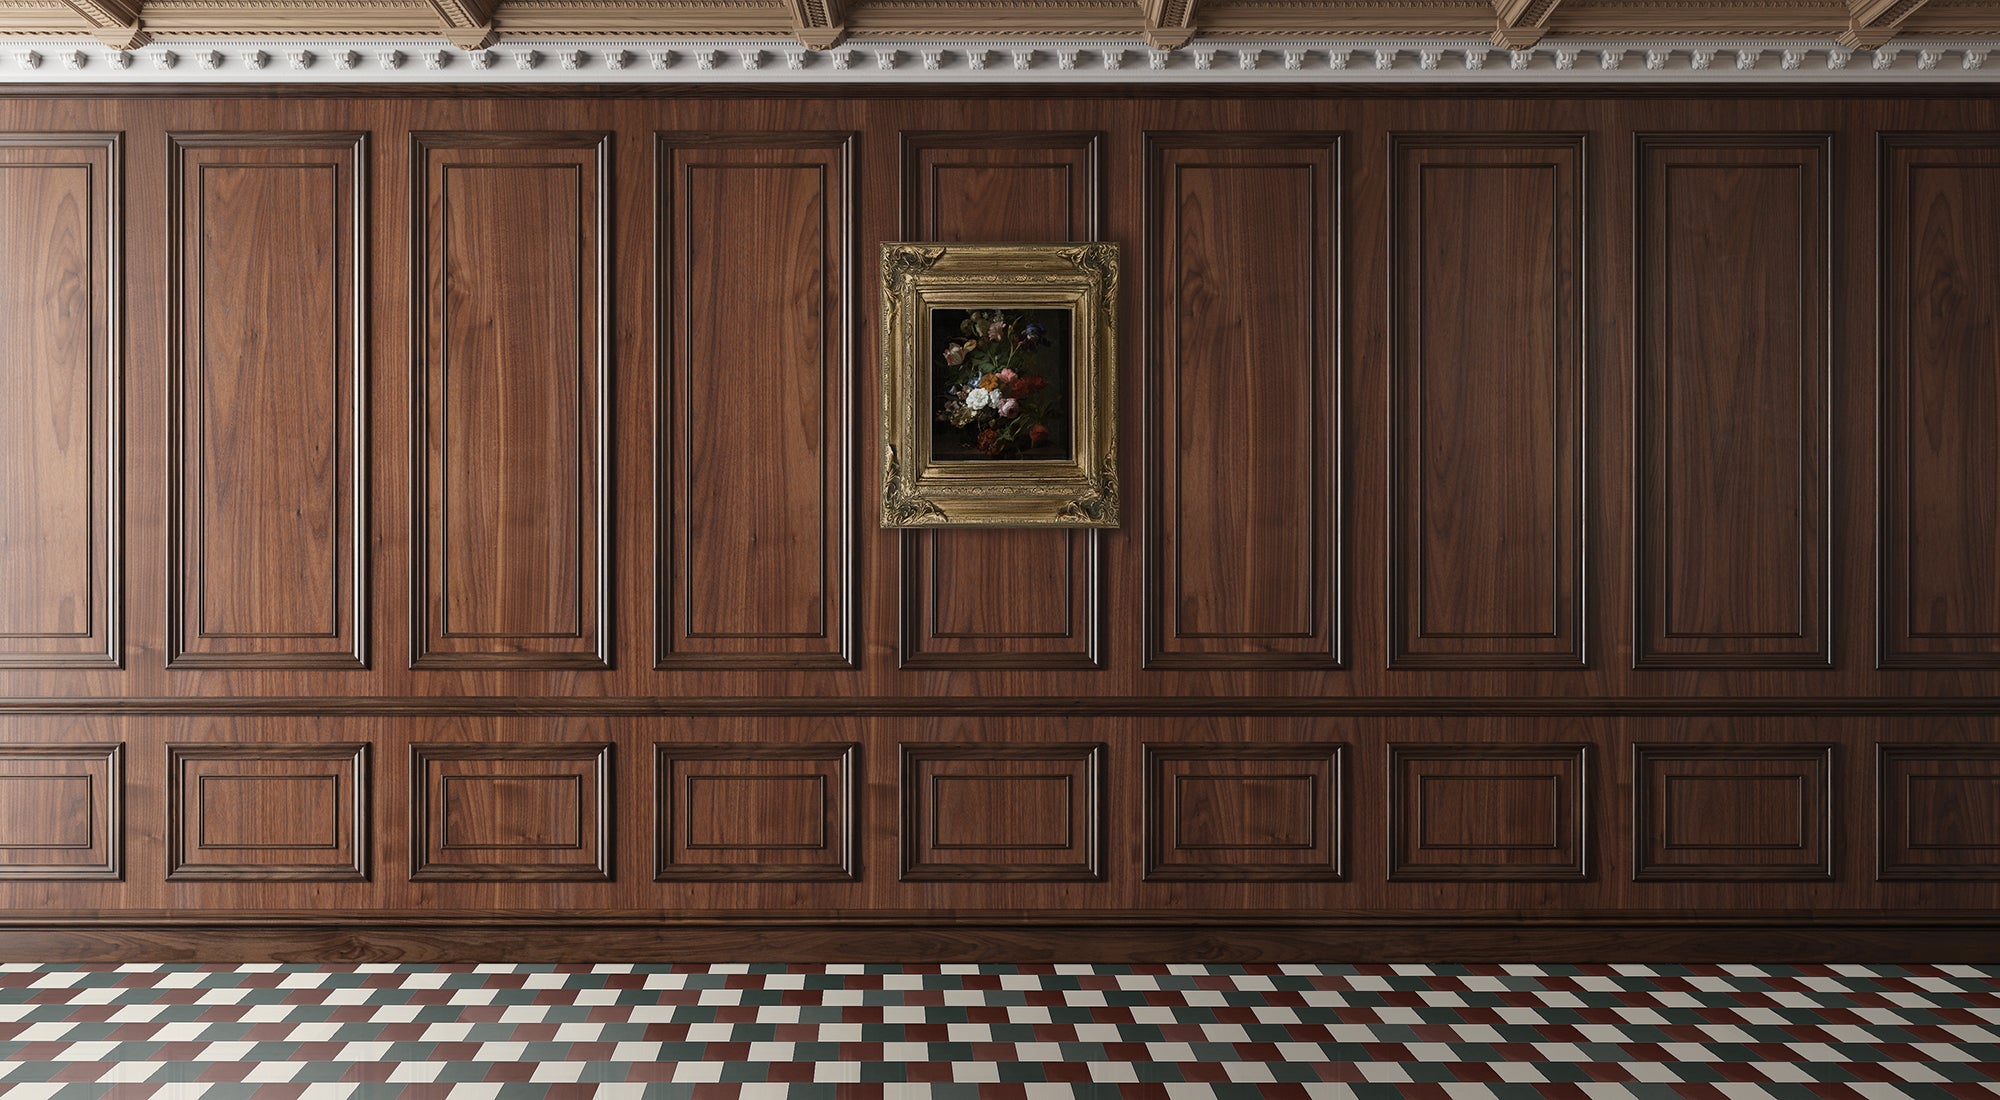 A wood paneled wall with a small, ornate watercolor and a tile floor of clé's dartmoor color story.